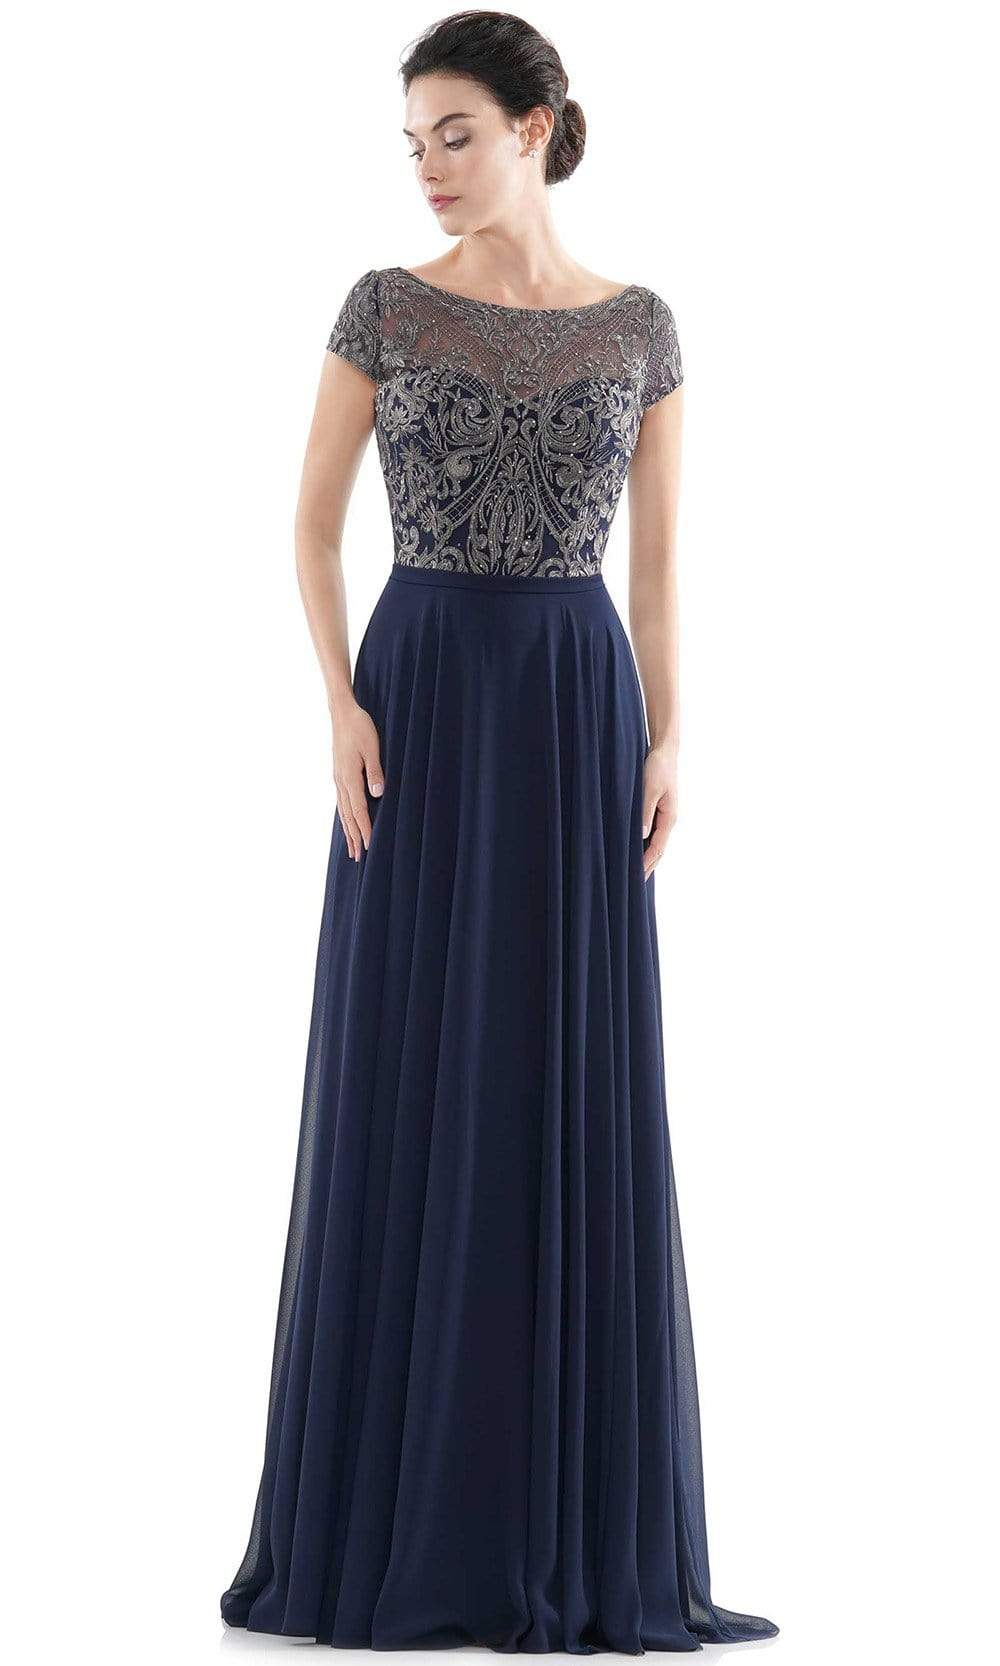 Image of Rina Di Montella - RD2719 Sheer Neck Embroidered Bodice Chiffon Gown